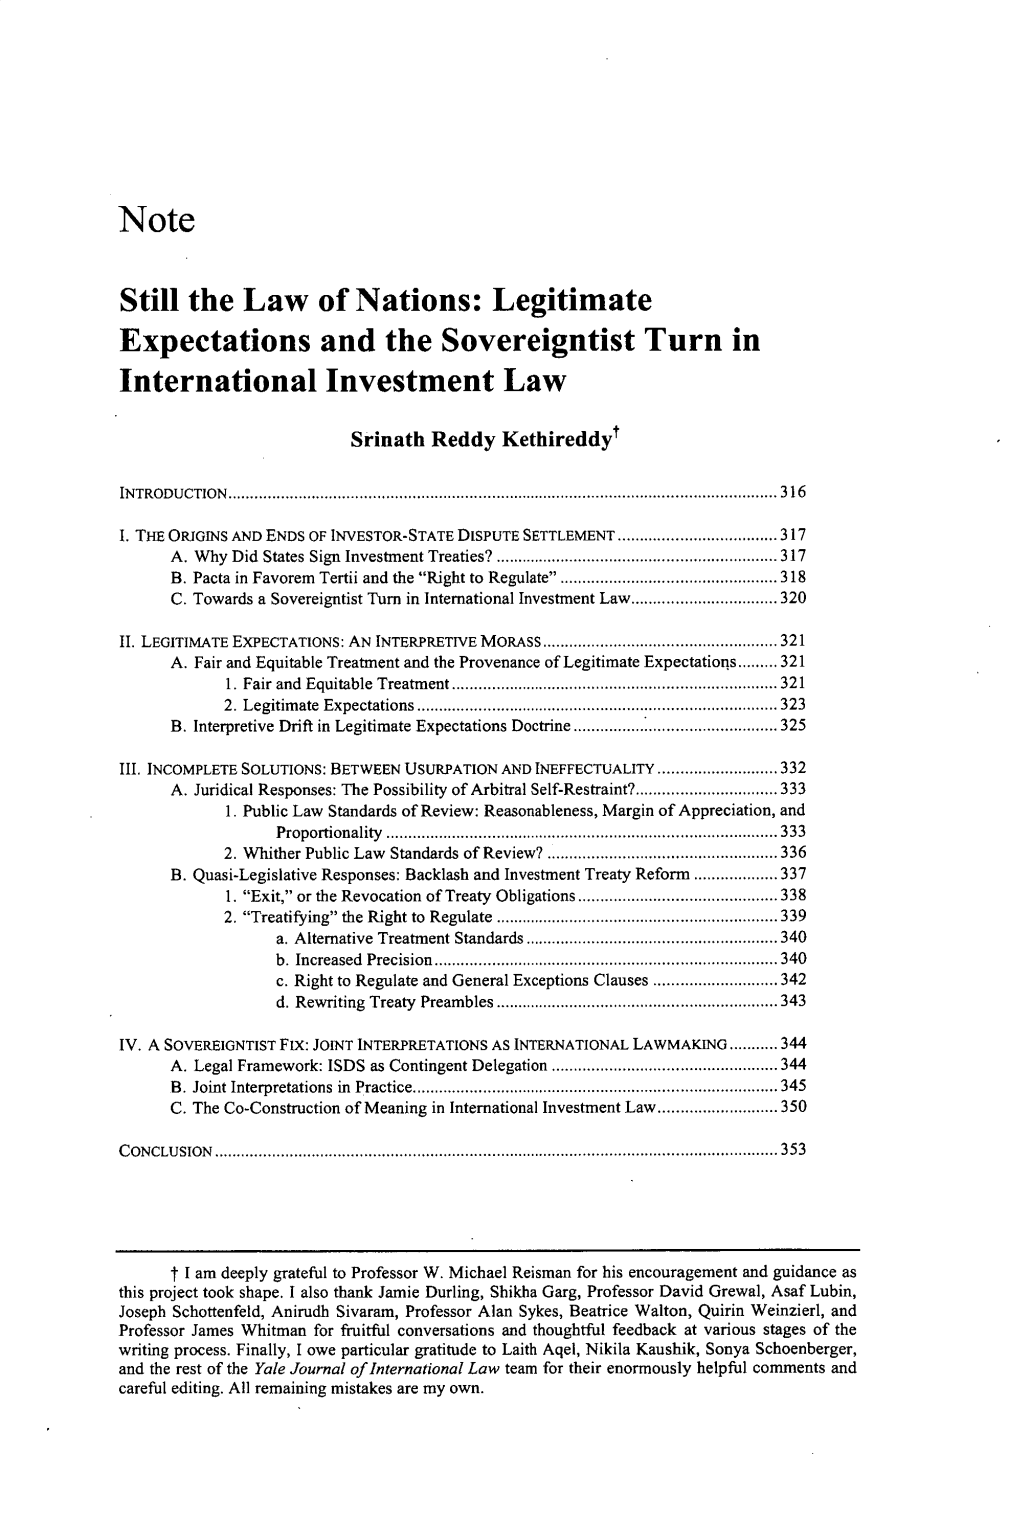 Still the Law of Nations: Legitimate Expectations and the Sovereigntist Turn in International Investment Law